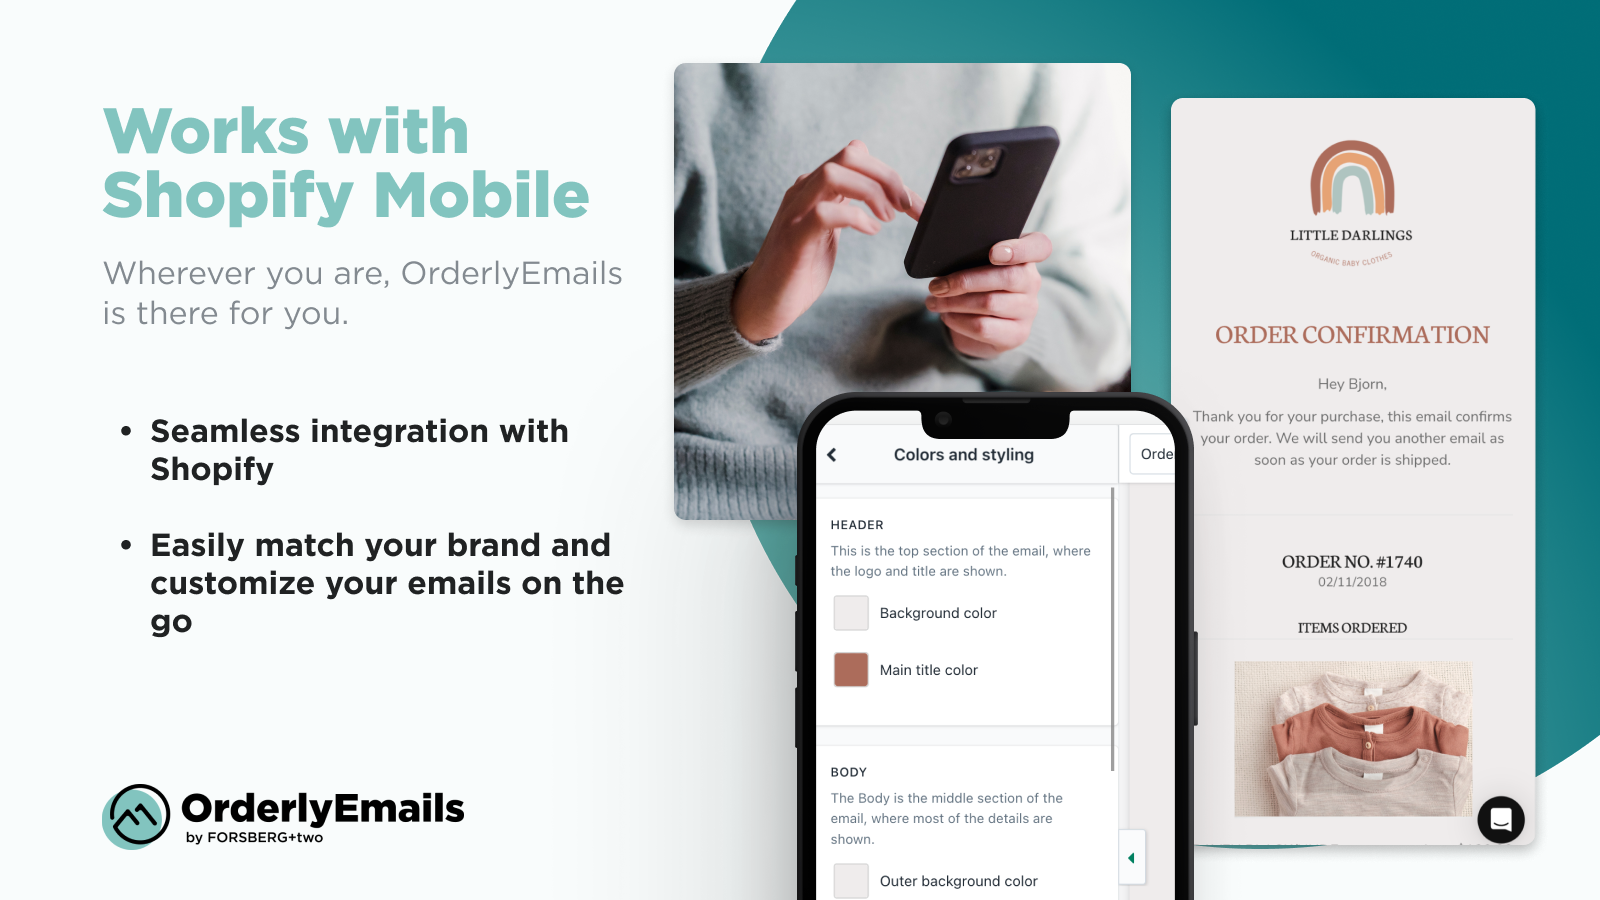 OrderlyEmails: Works with Shopify Mobile